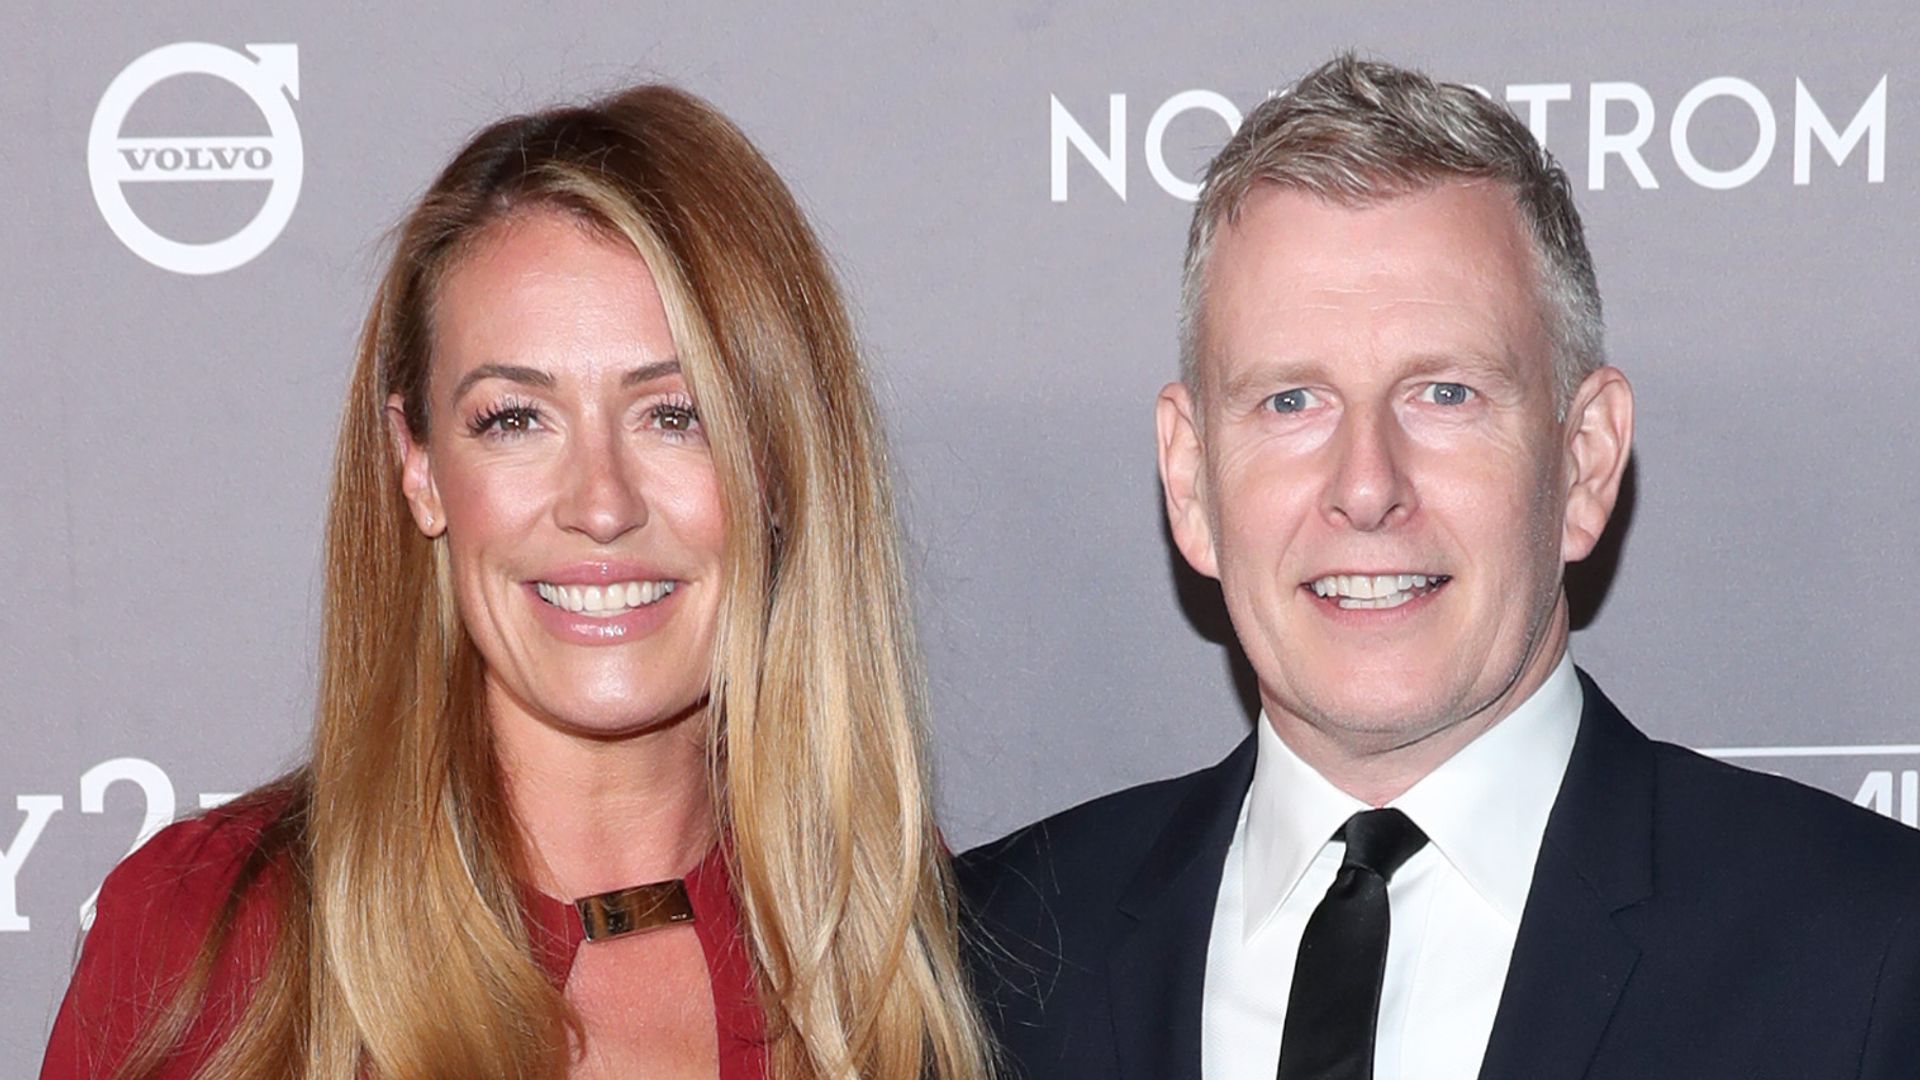 Cat Deeley and Patrick Kielty attend the 2019 Baby2Baby Gala presented by Paul Mitchell on November 09, 2019 in Los Angeles, California.